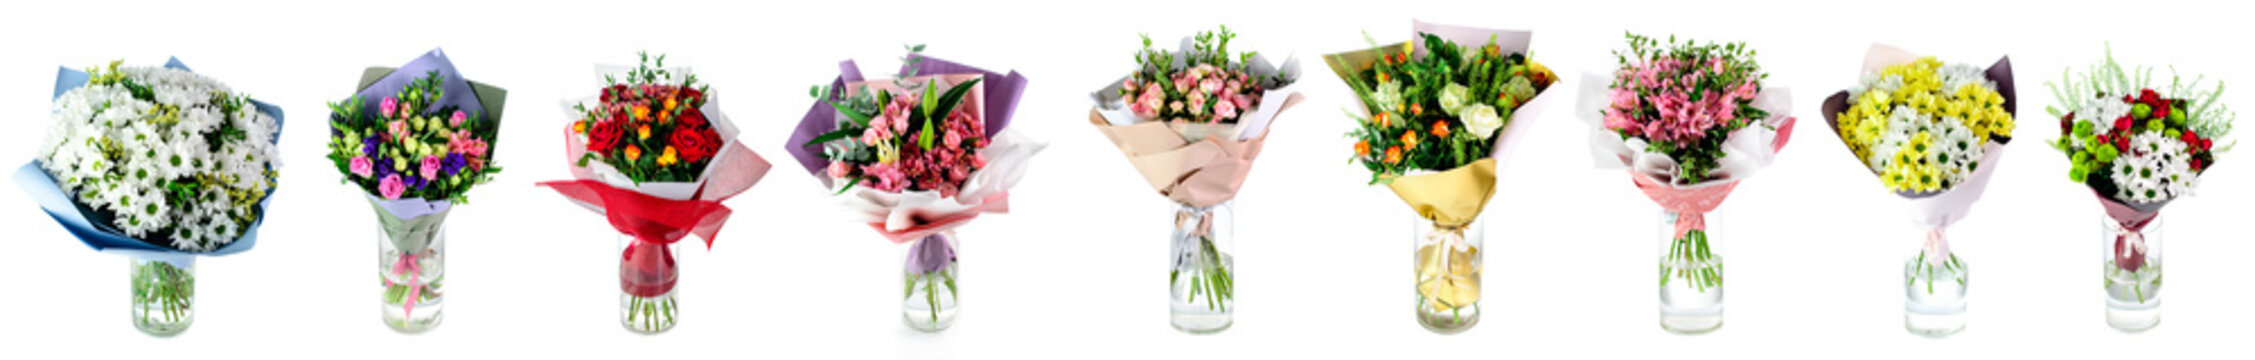 Set Of Multi-colored Bouquets Of Flowers In A Glass Vase Isolated On White